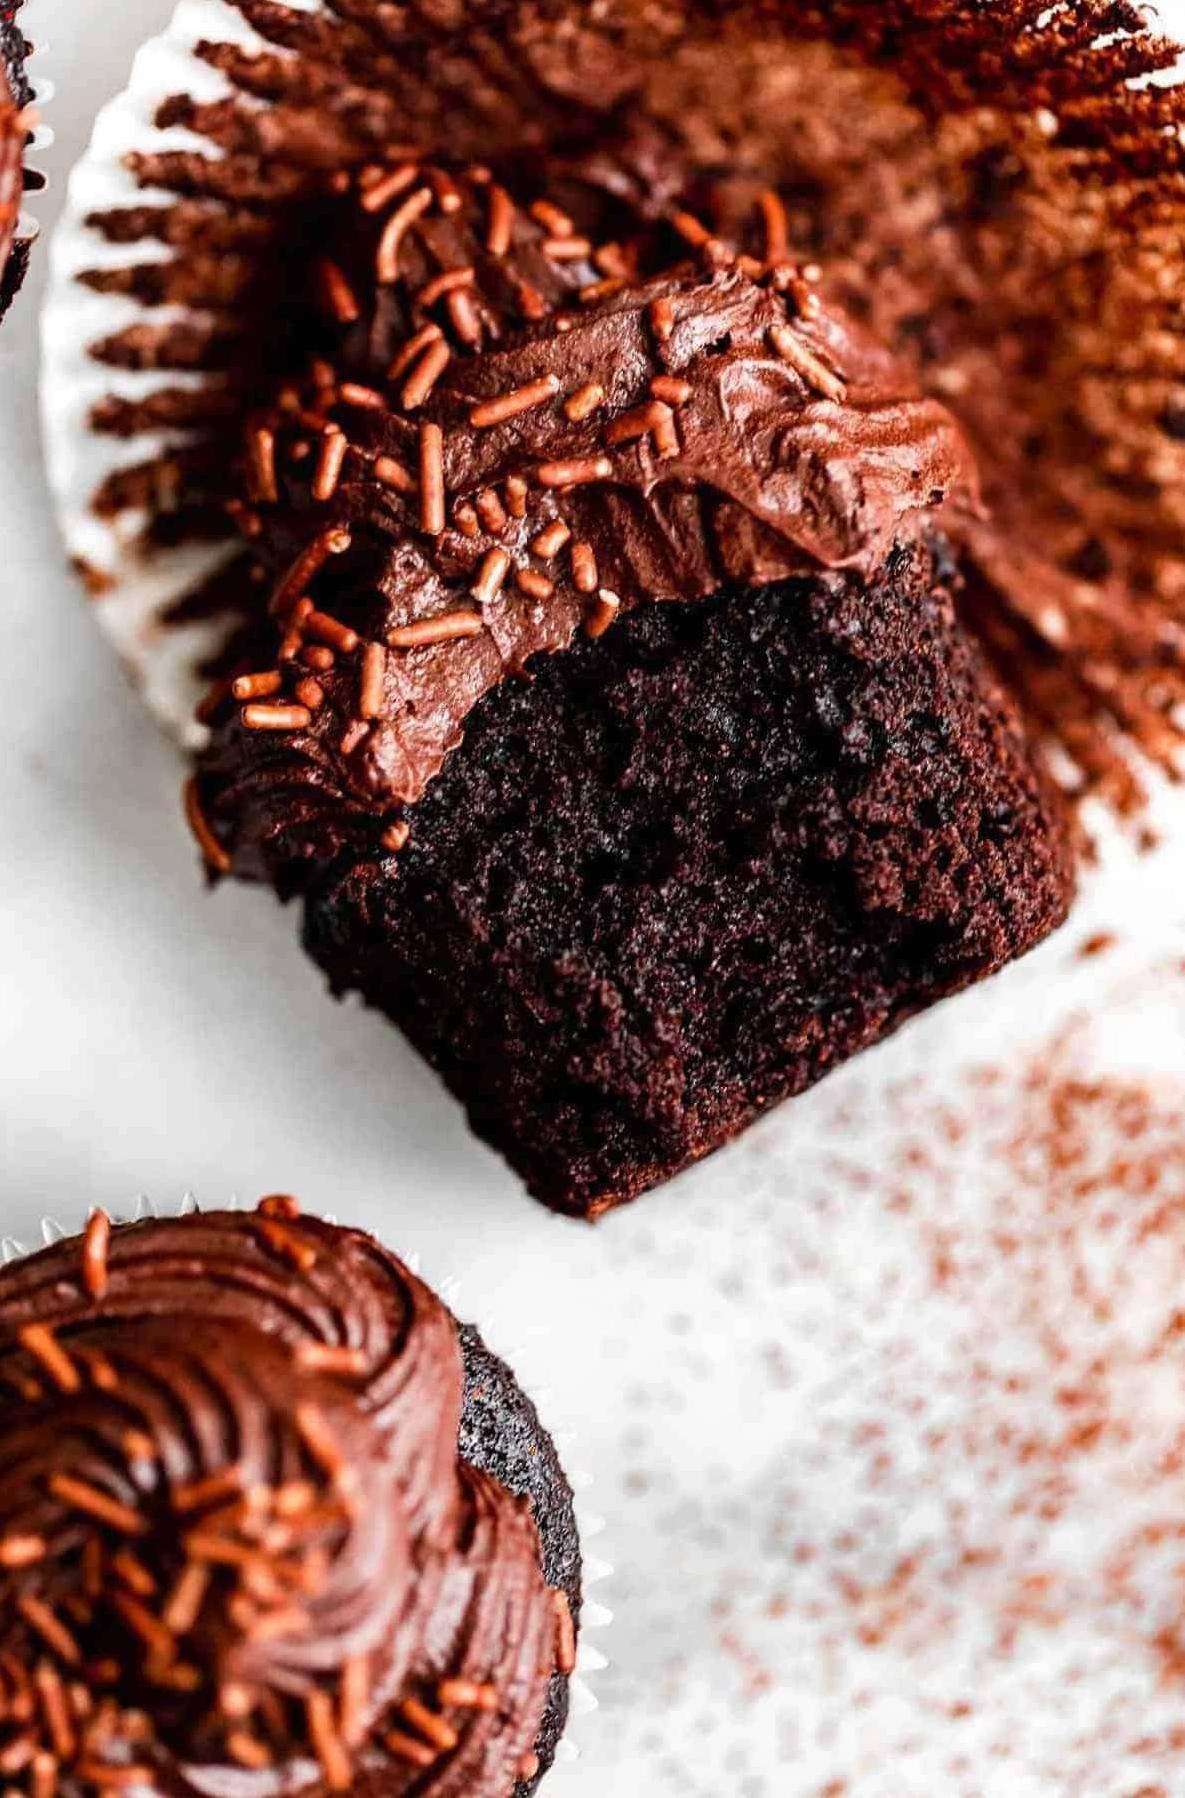  Chocolatey goodness inside out – our fudge cupcakes do not disappoint.